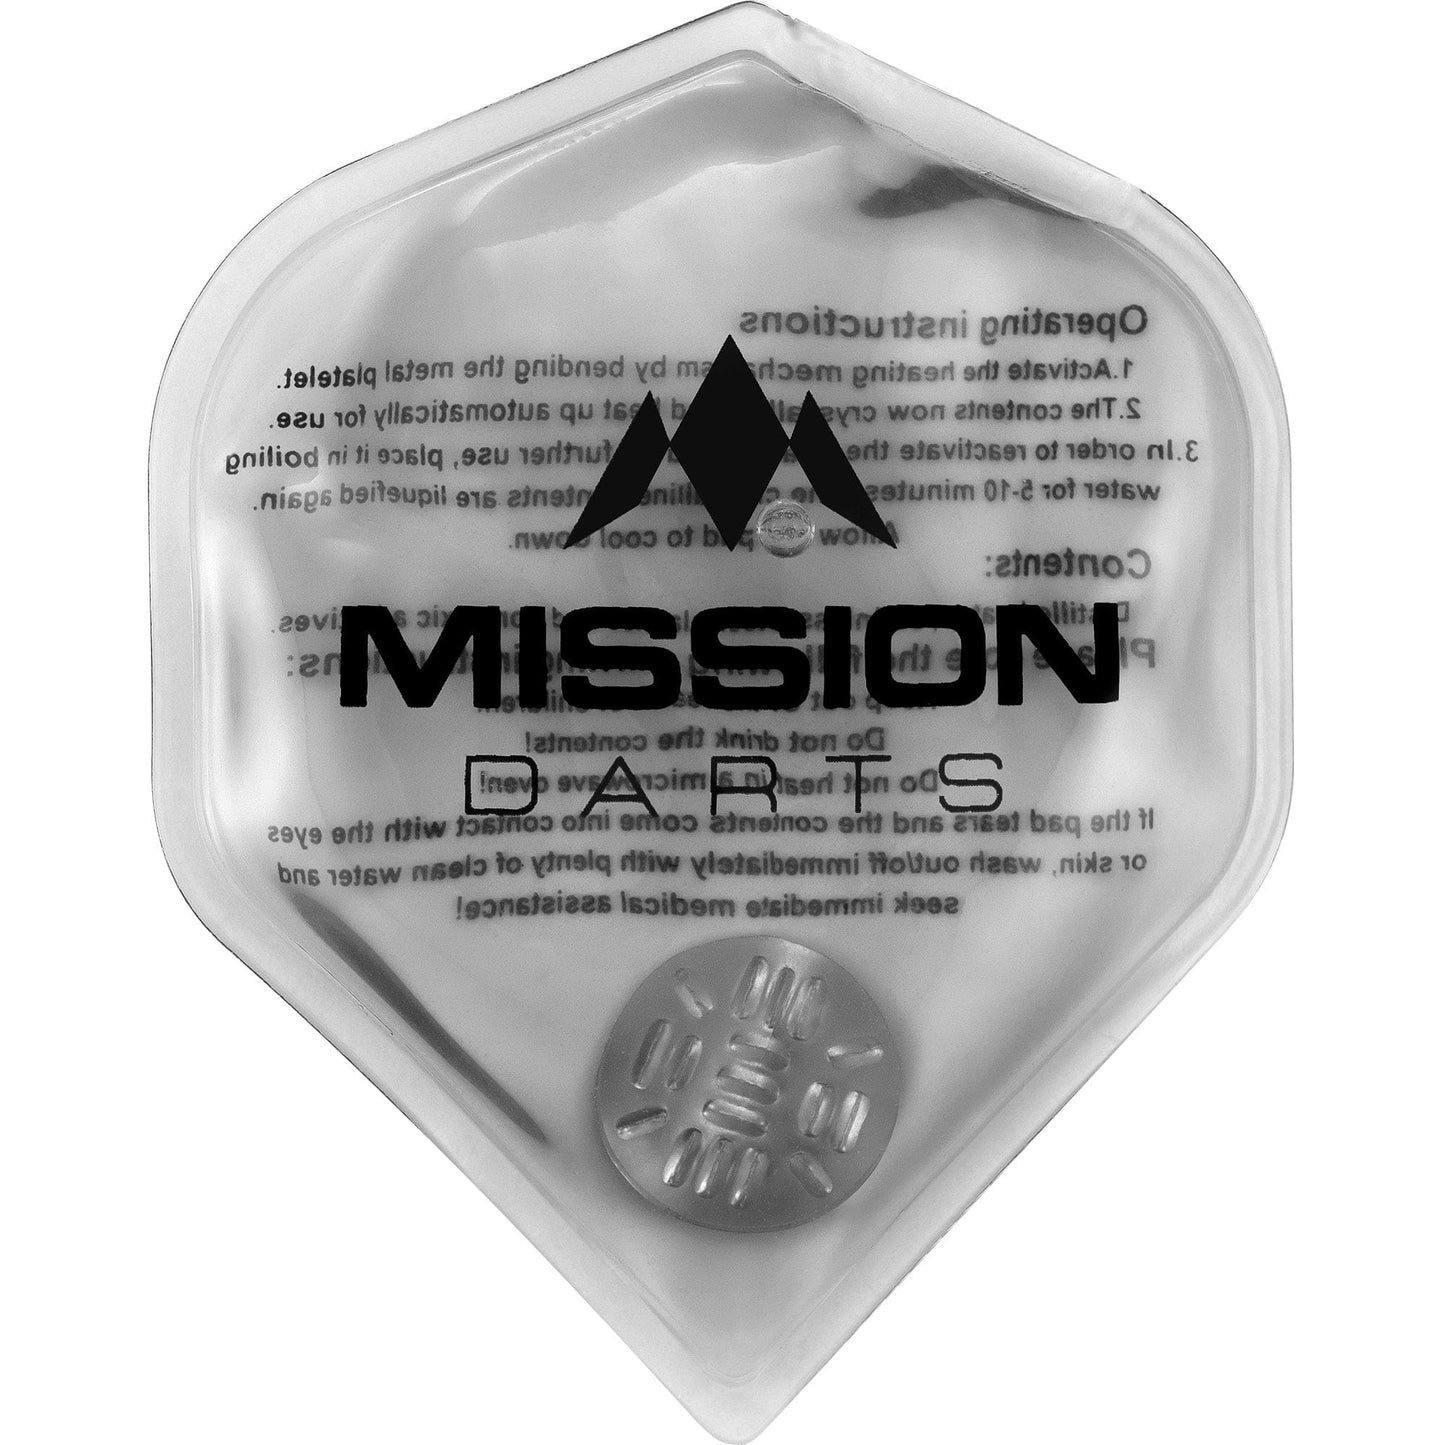 Mission Flux - Luxury Hand Warmer - Reusable Clear